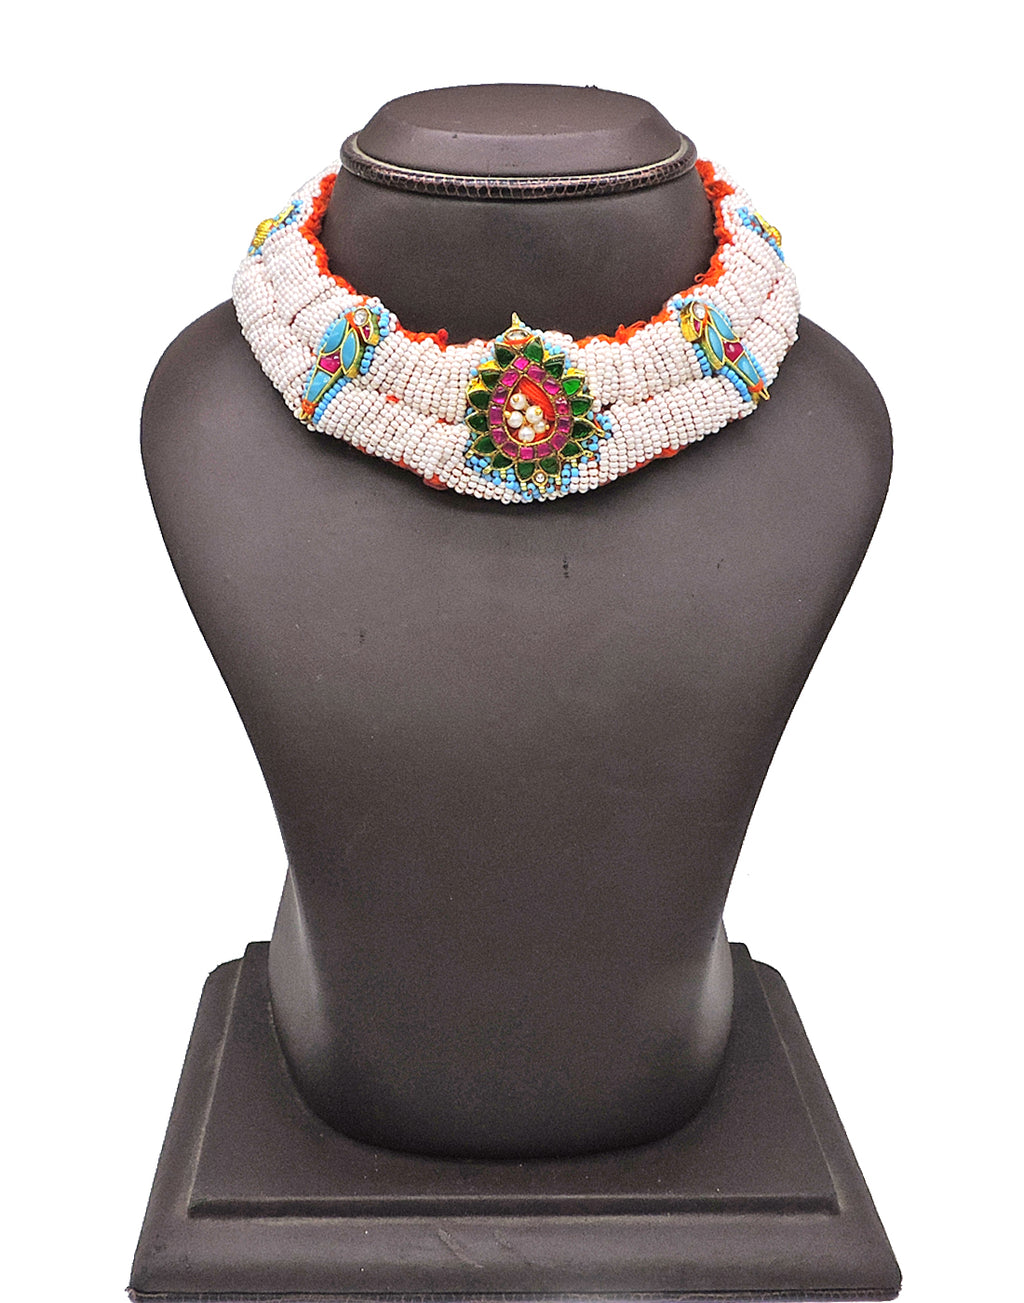 Beaded Heritage Necklace - Statement Necklaces - Gold-Plated & Hypoallergenic Jewellery - Made in India - Dubai Jewellery - Dori